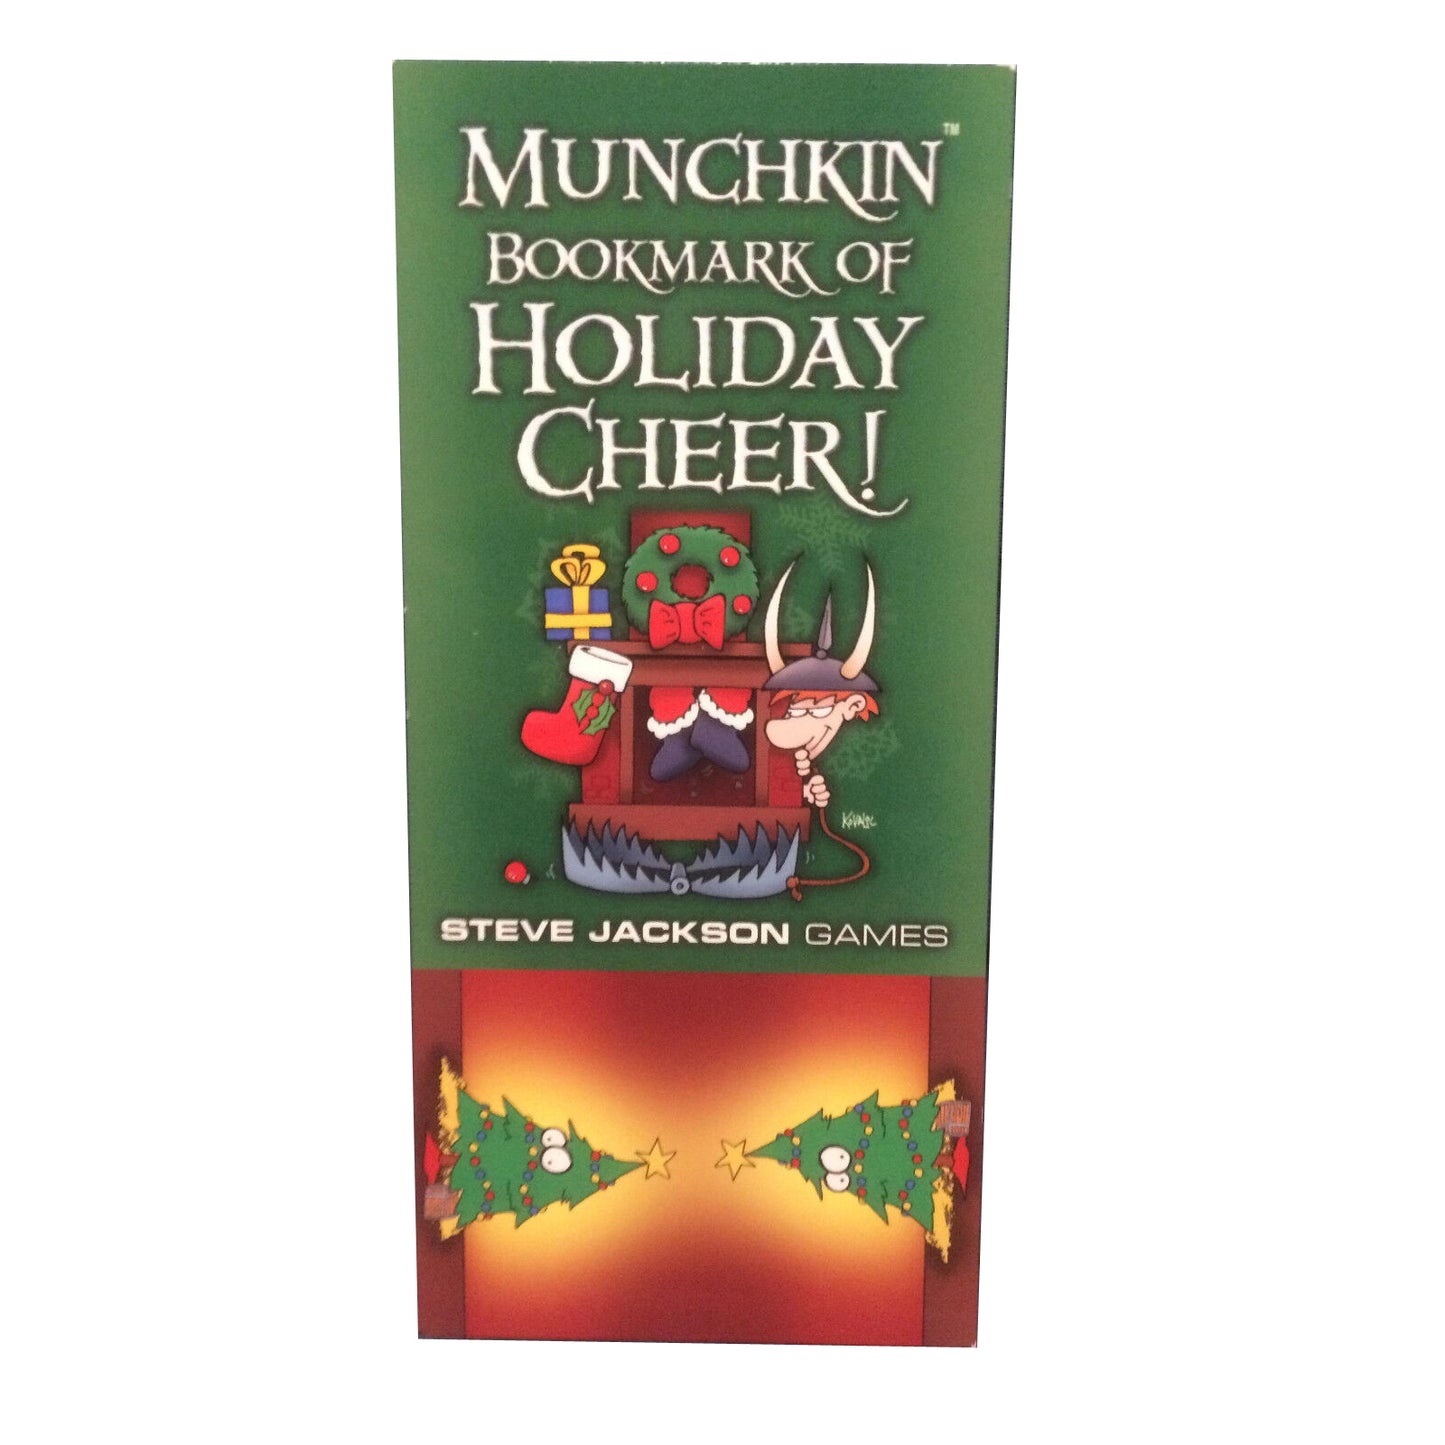 The Official Munchkin Bookmark of Holiday Cheer!